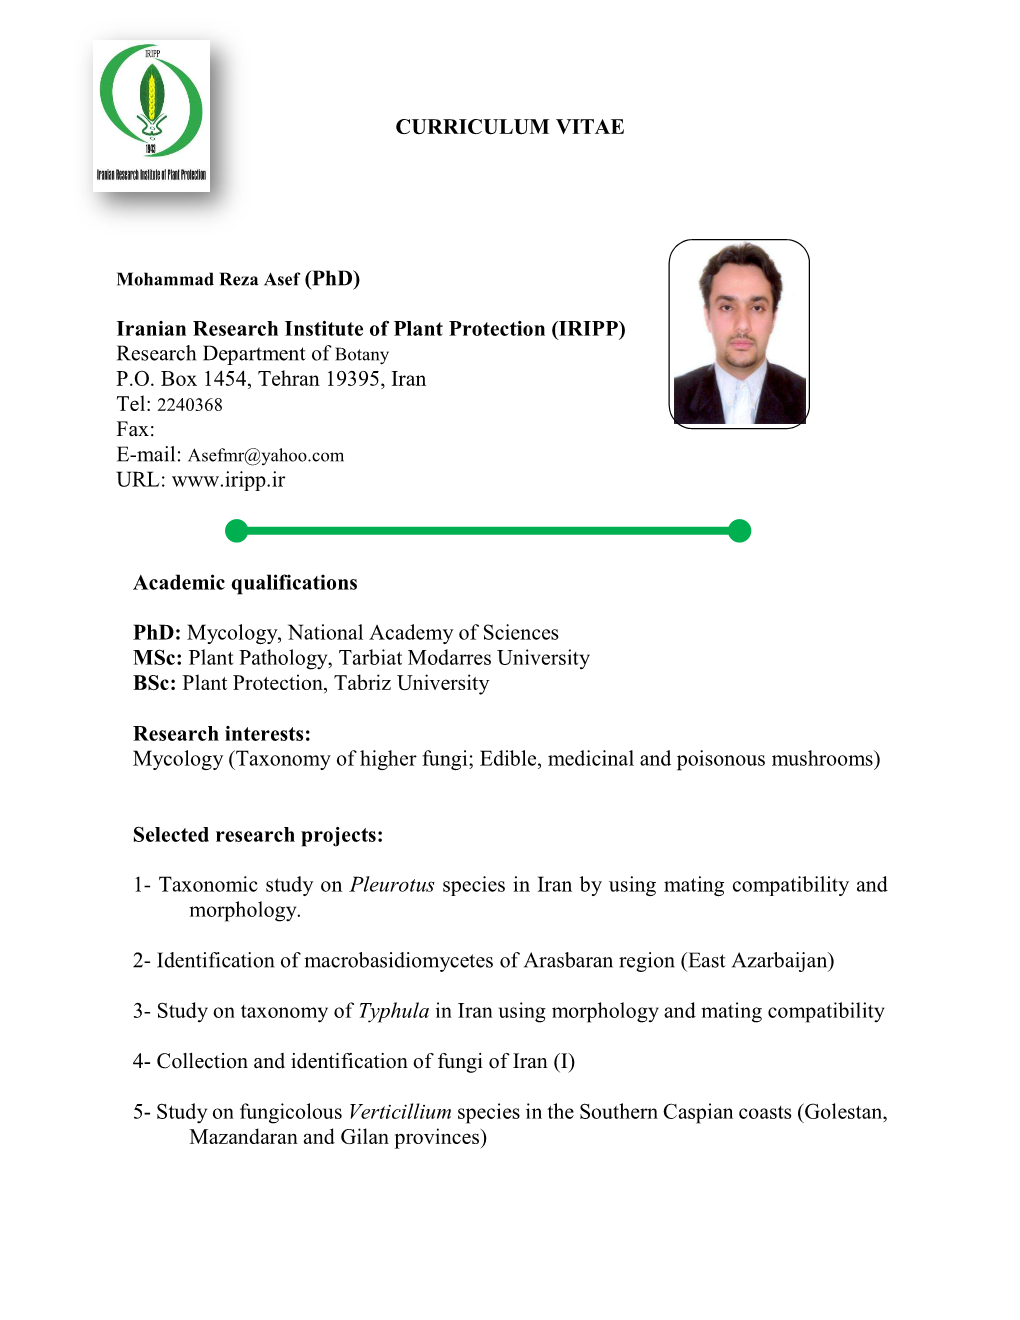 CURRICULUM VITAE Iranian Research Institute of Plant Protection (IRIPP) Research Department of Botany P.O. Box 1454, Tehran